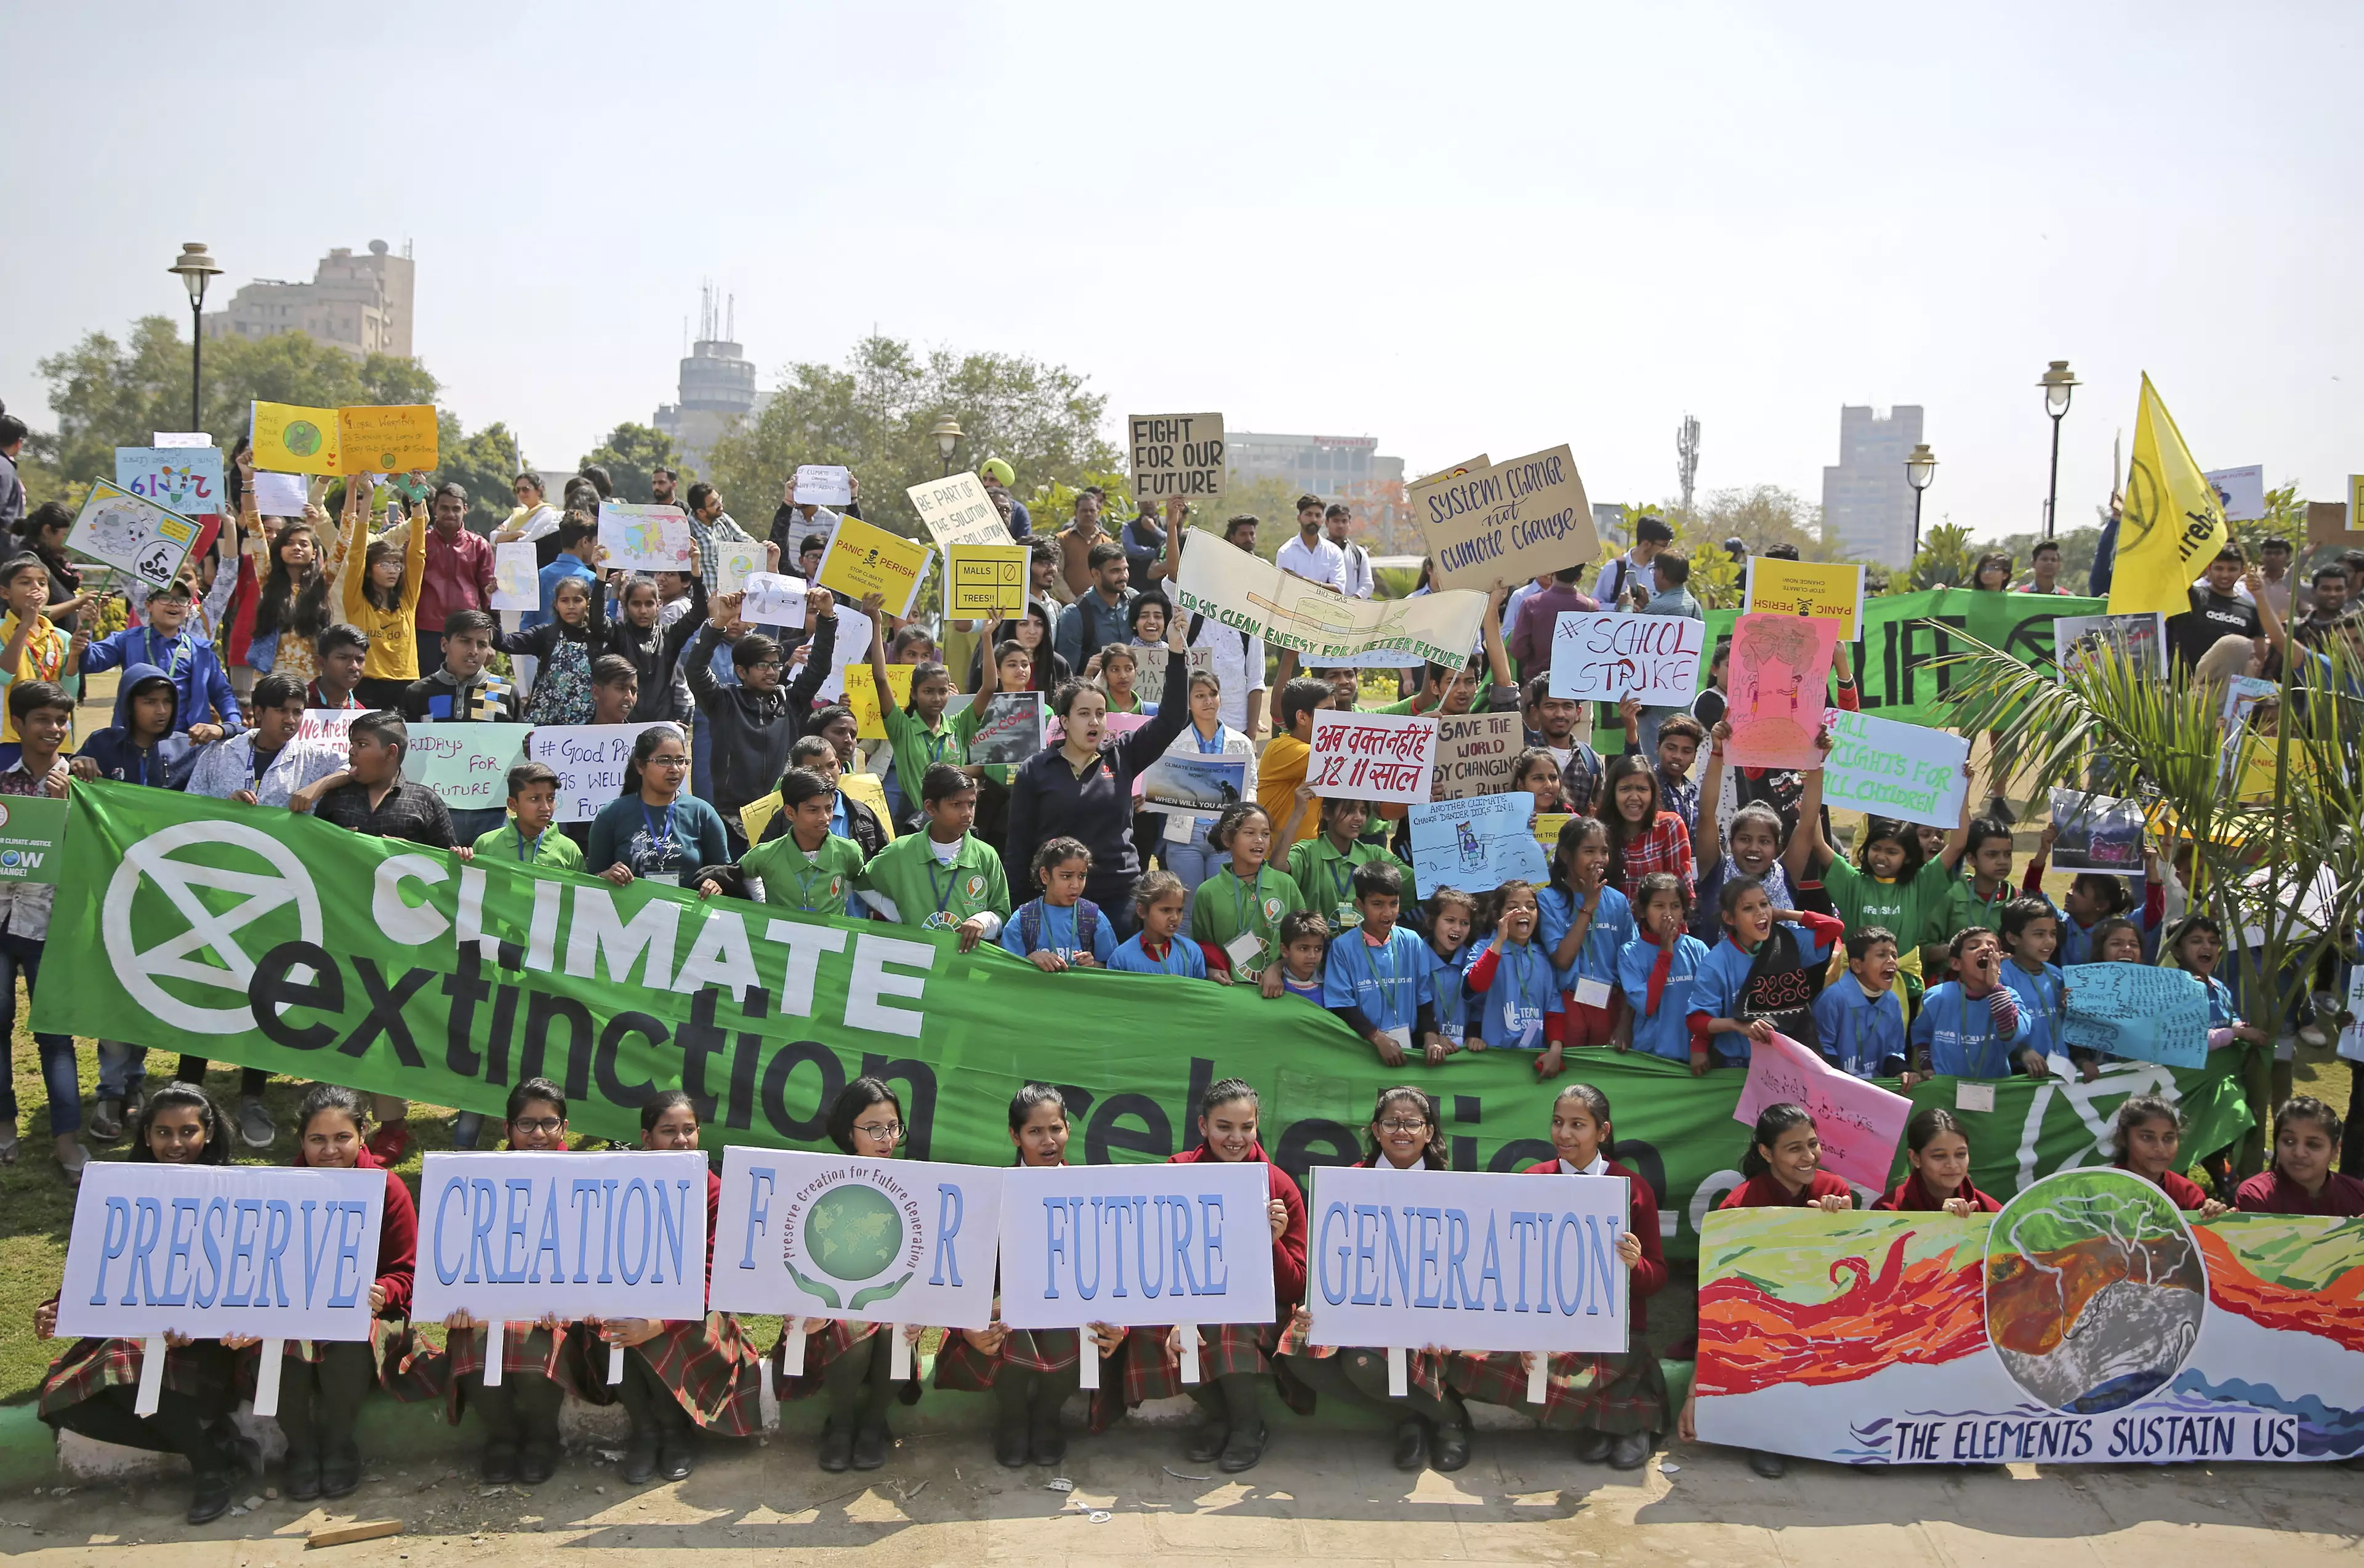 Students around the globe are marching to raise awareness of global warming.